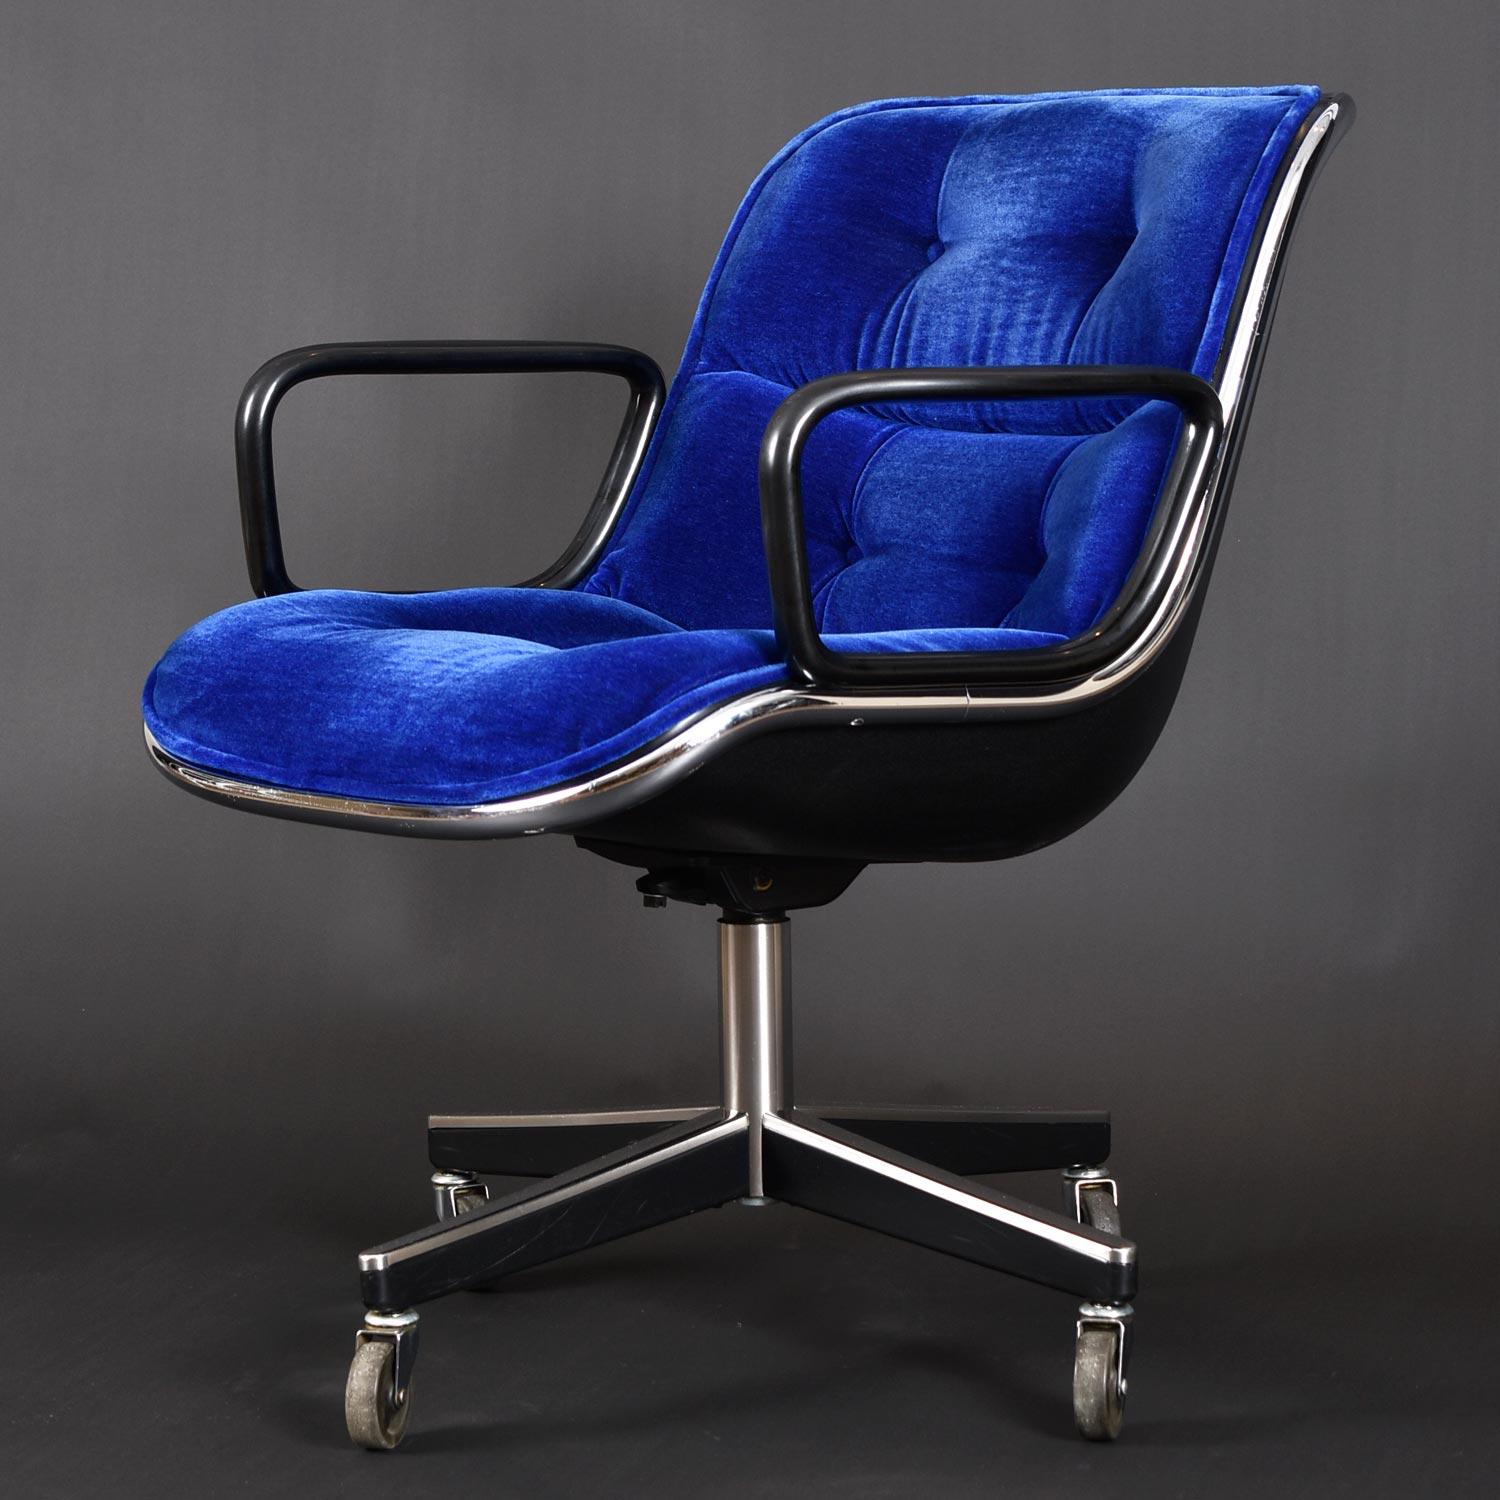 Mid-Century Modern Blue Velvet Executive Chair Charles Pollock for Knoll with Height Tension Knob For Sale